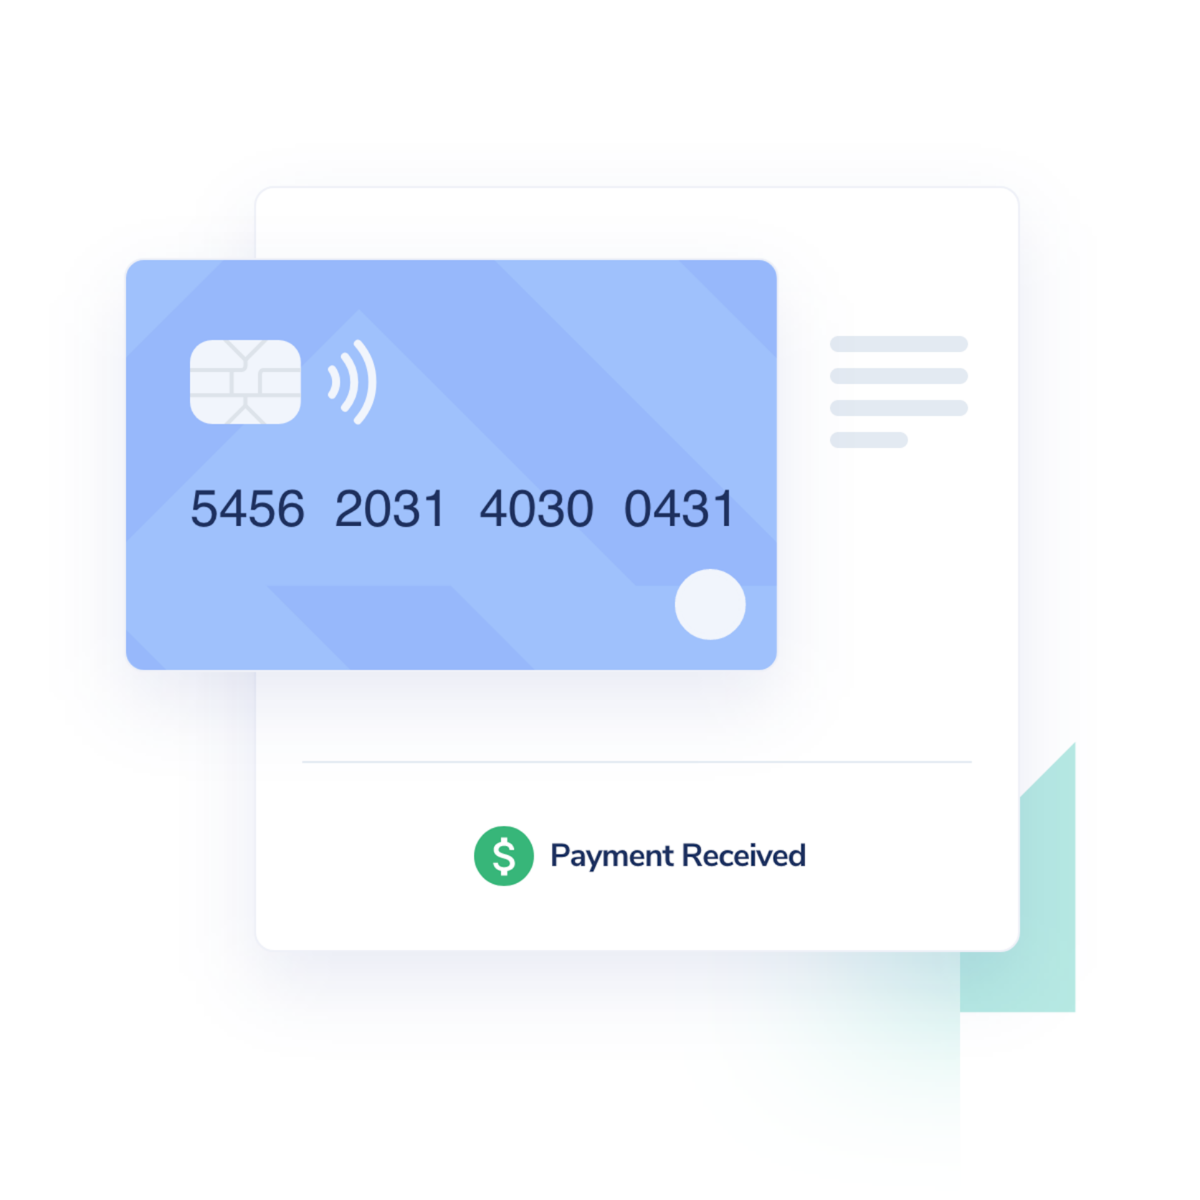 Credit card signifying a payment was received